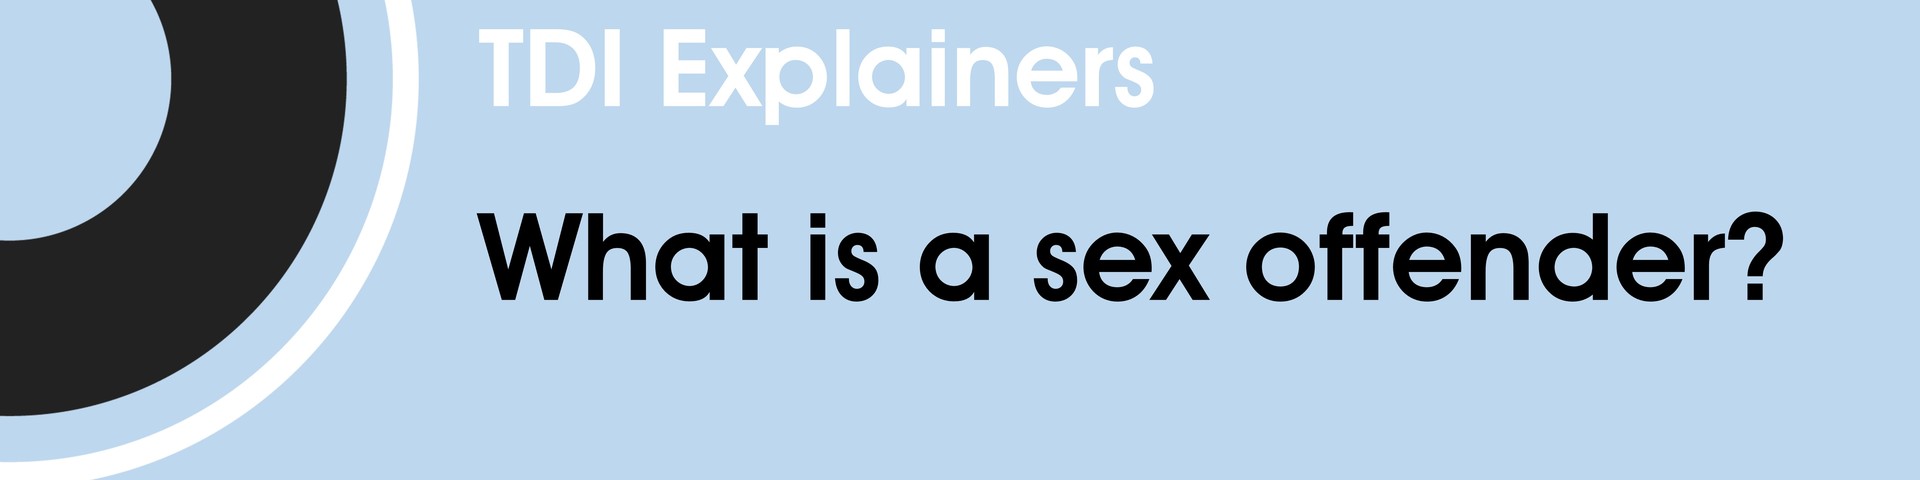 What is a sex offender?